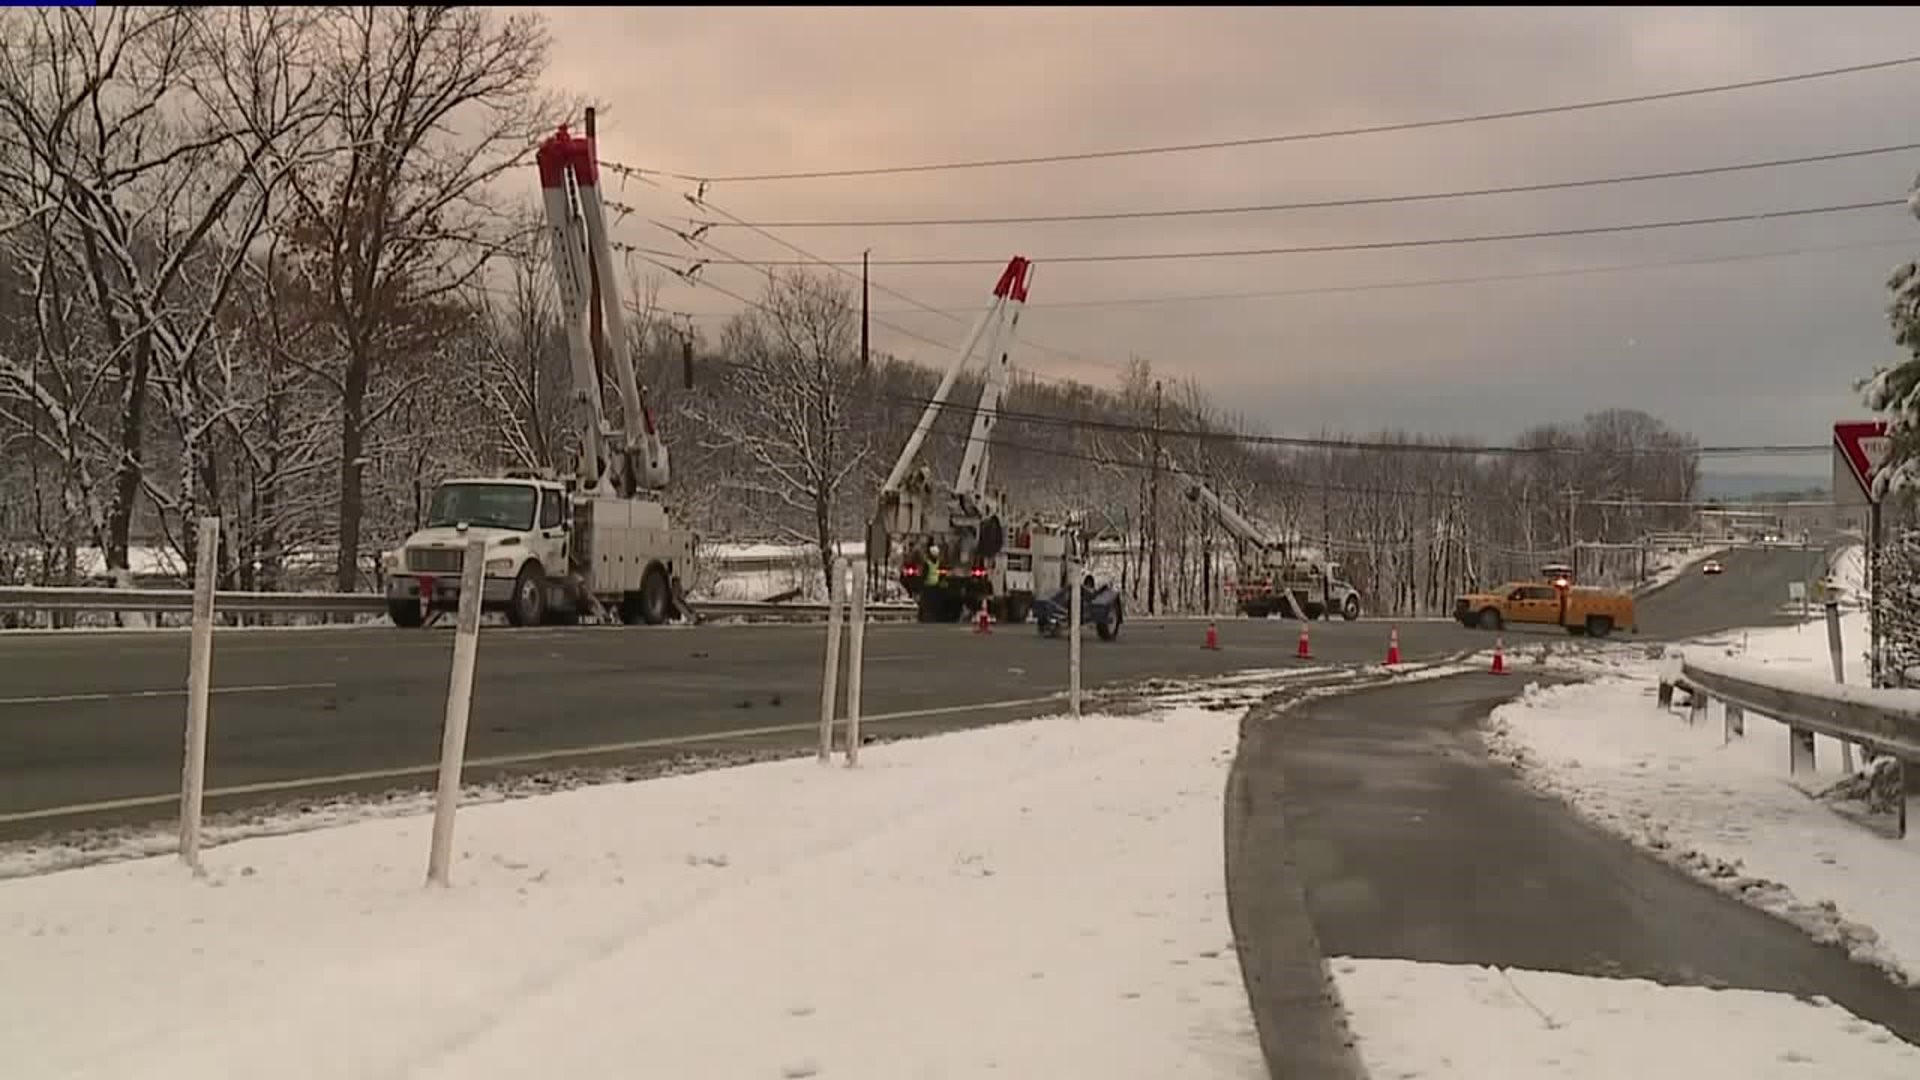 Part of Route 315 Closed After Crash Takes Down Wires